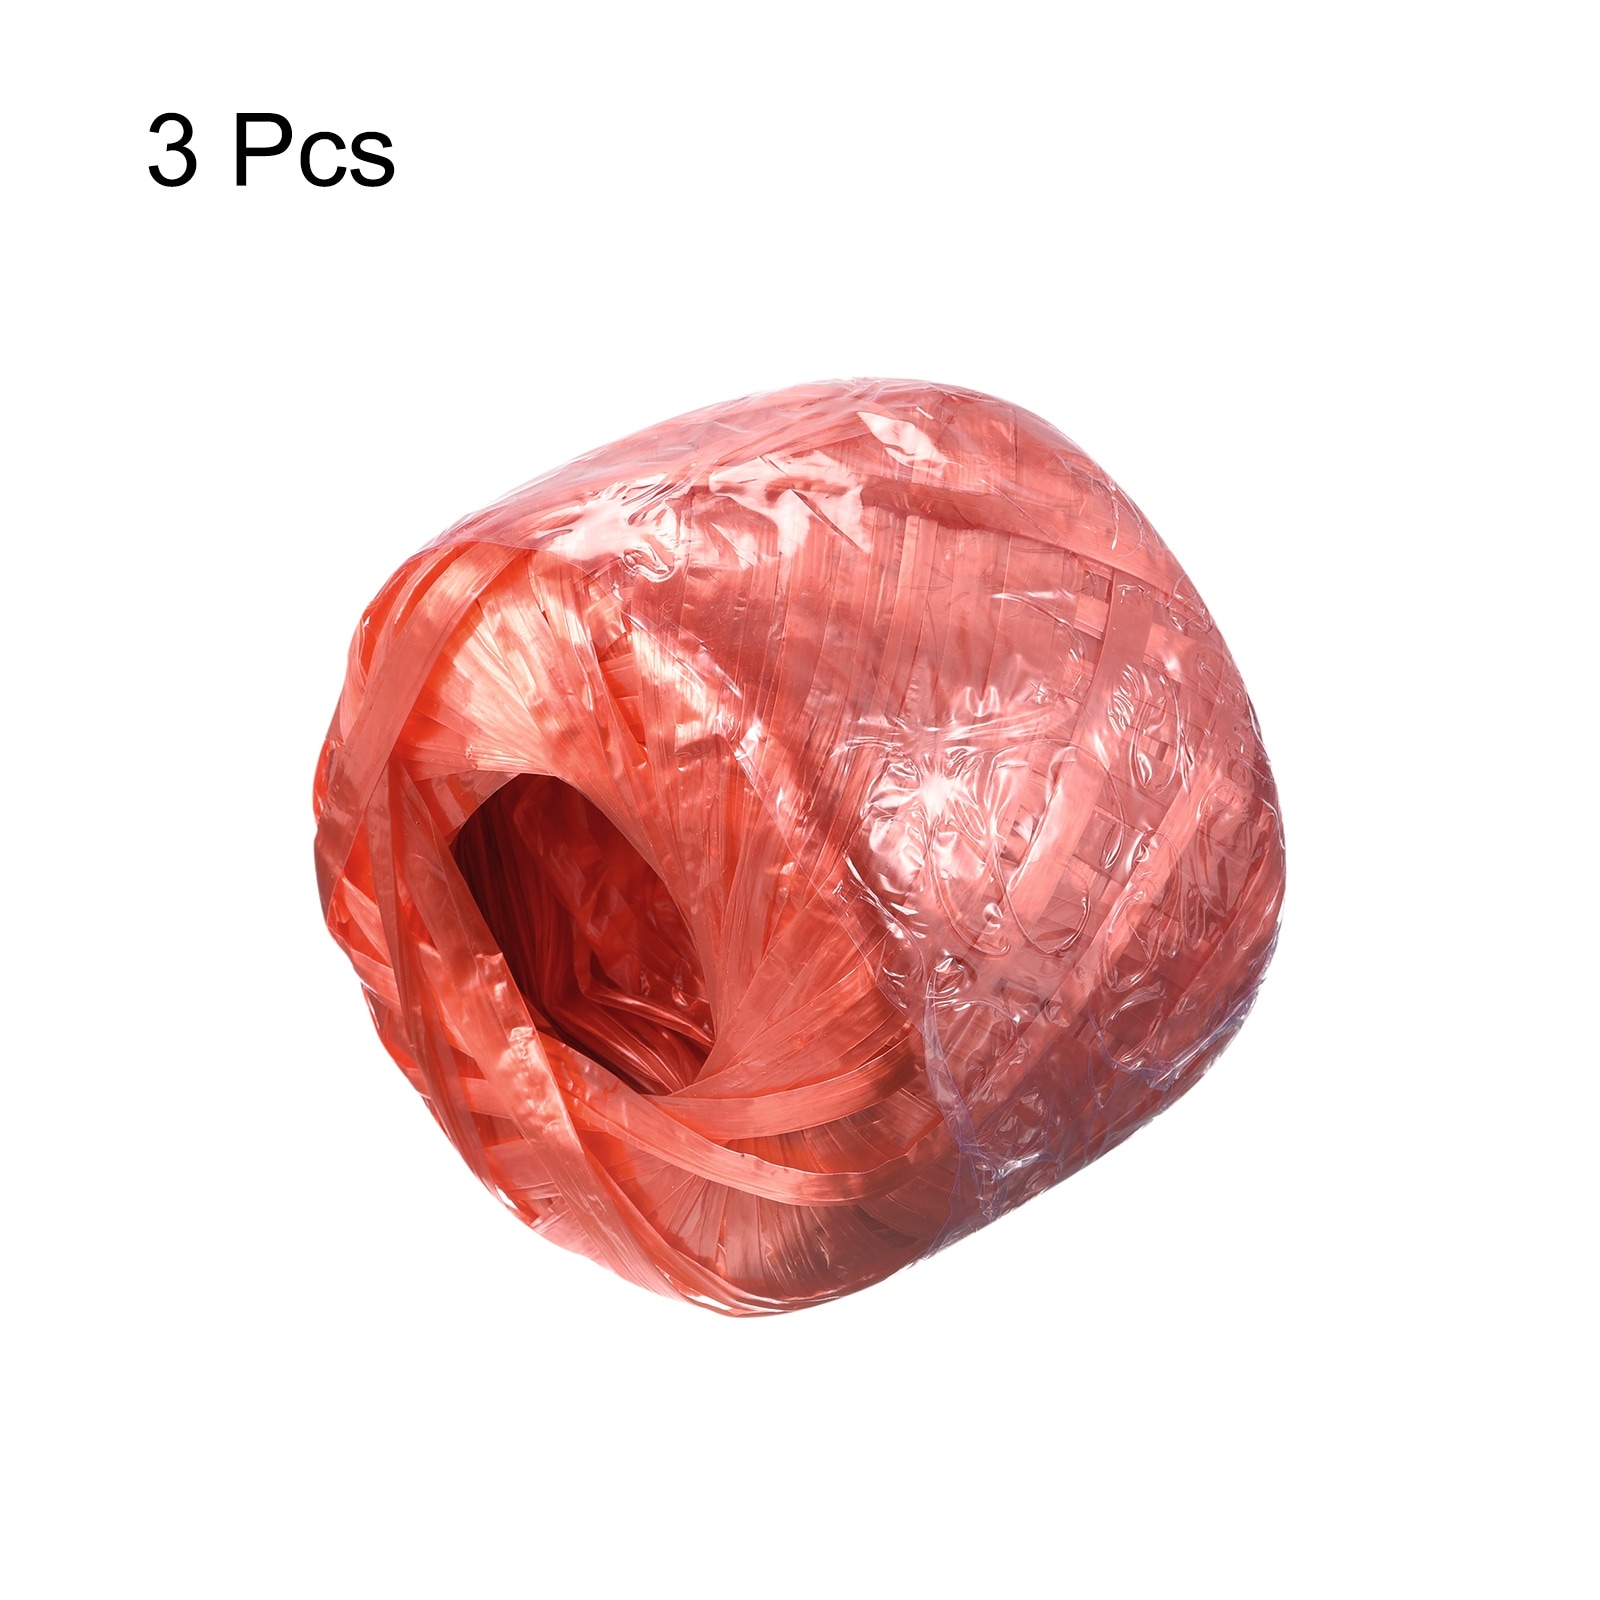 https://ak1.ostkcdn.com/images/products/is/images/direct/80955a52b0c8ba39a61f7680663699a683c8046f/Polyester-Nylon-Plastic-Rope-Twine-Household-Bundled-for-Packing-%2C100m-Red-3Pcs.jpg